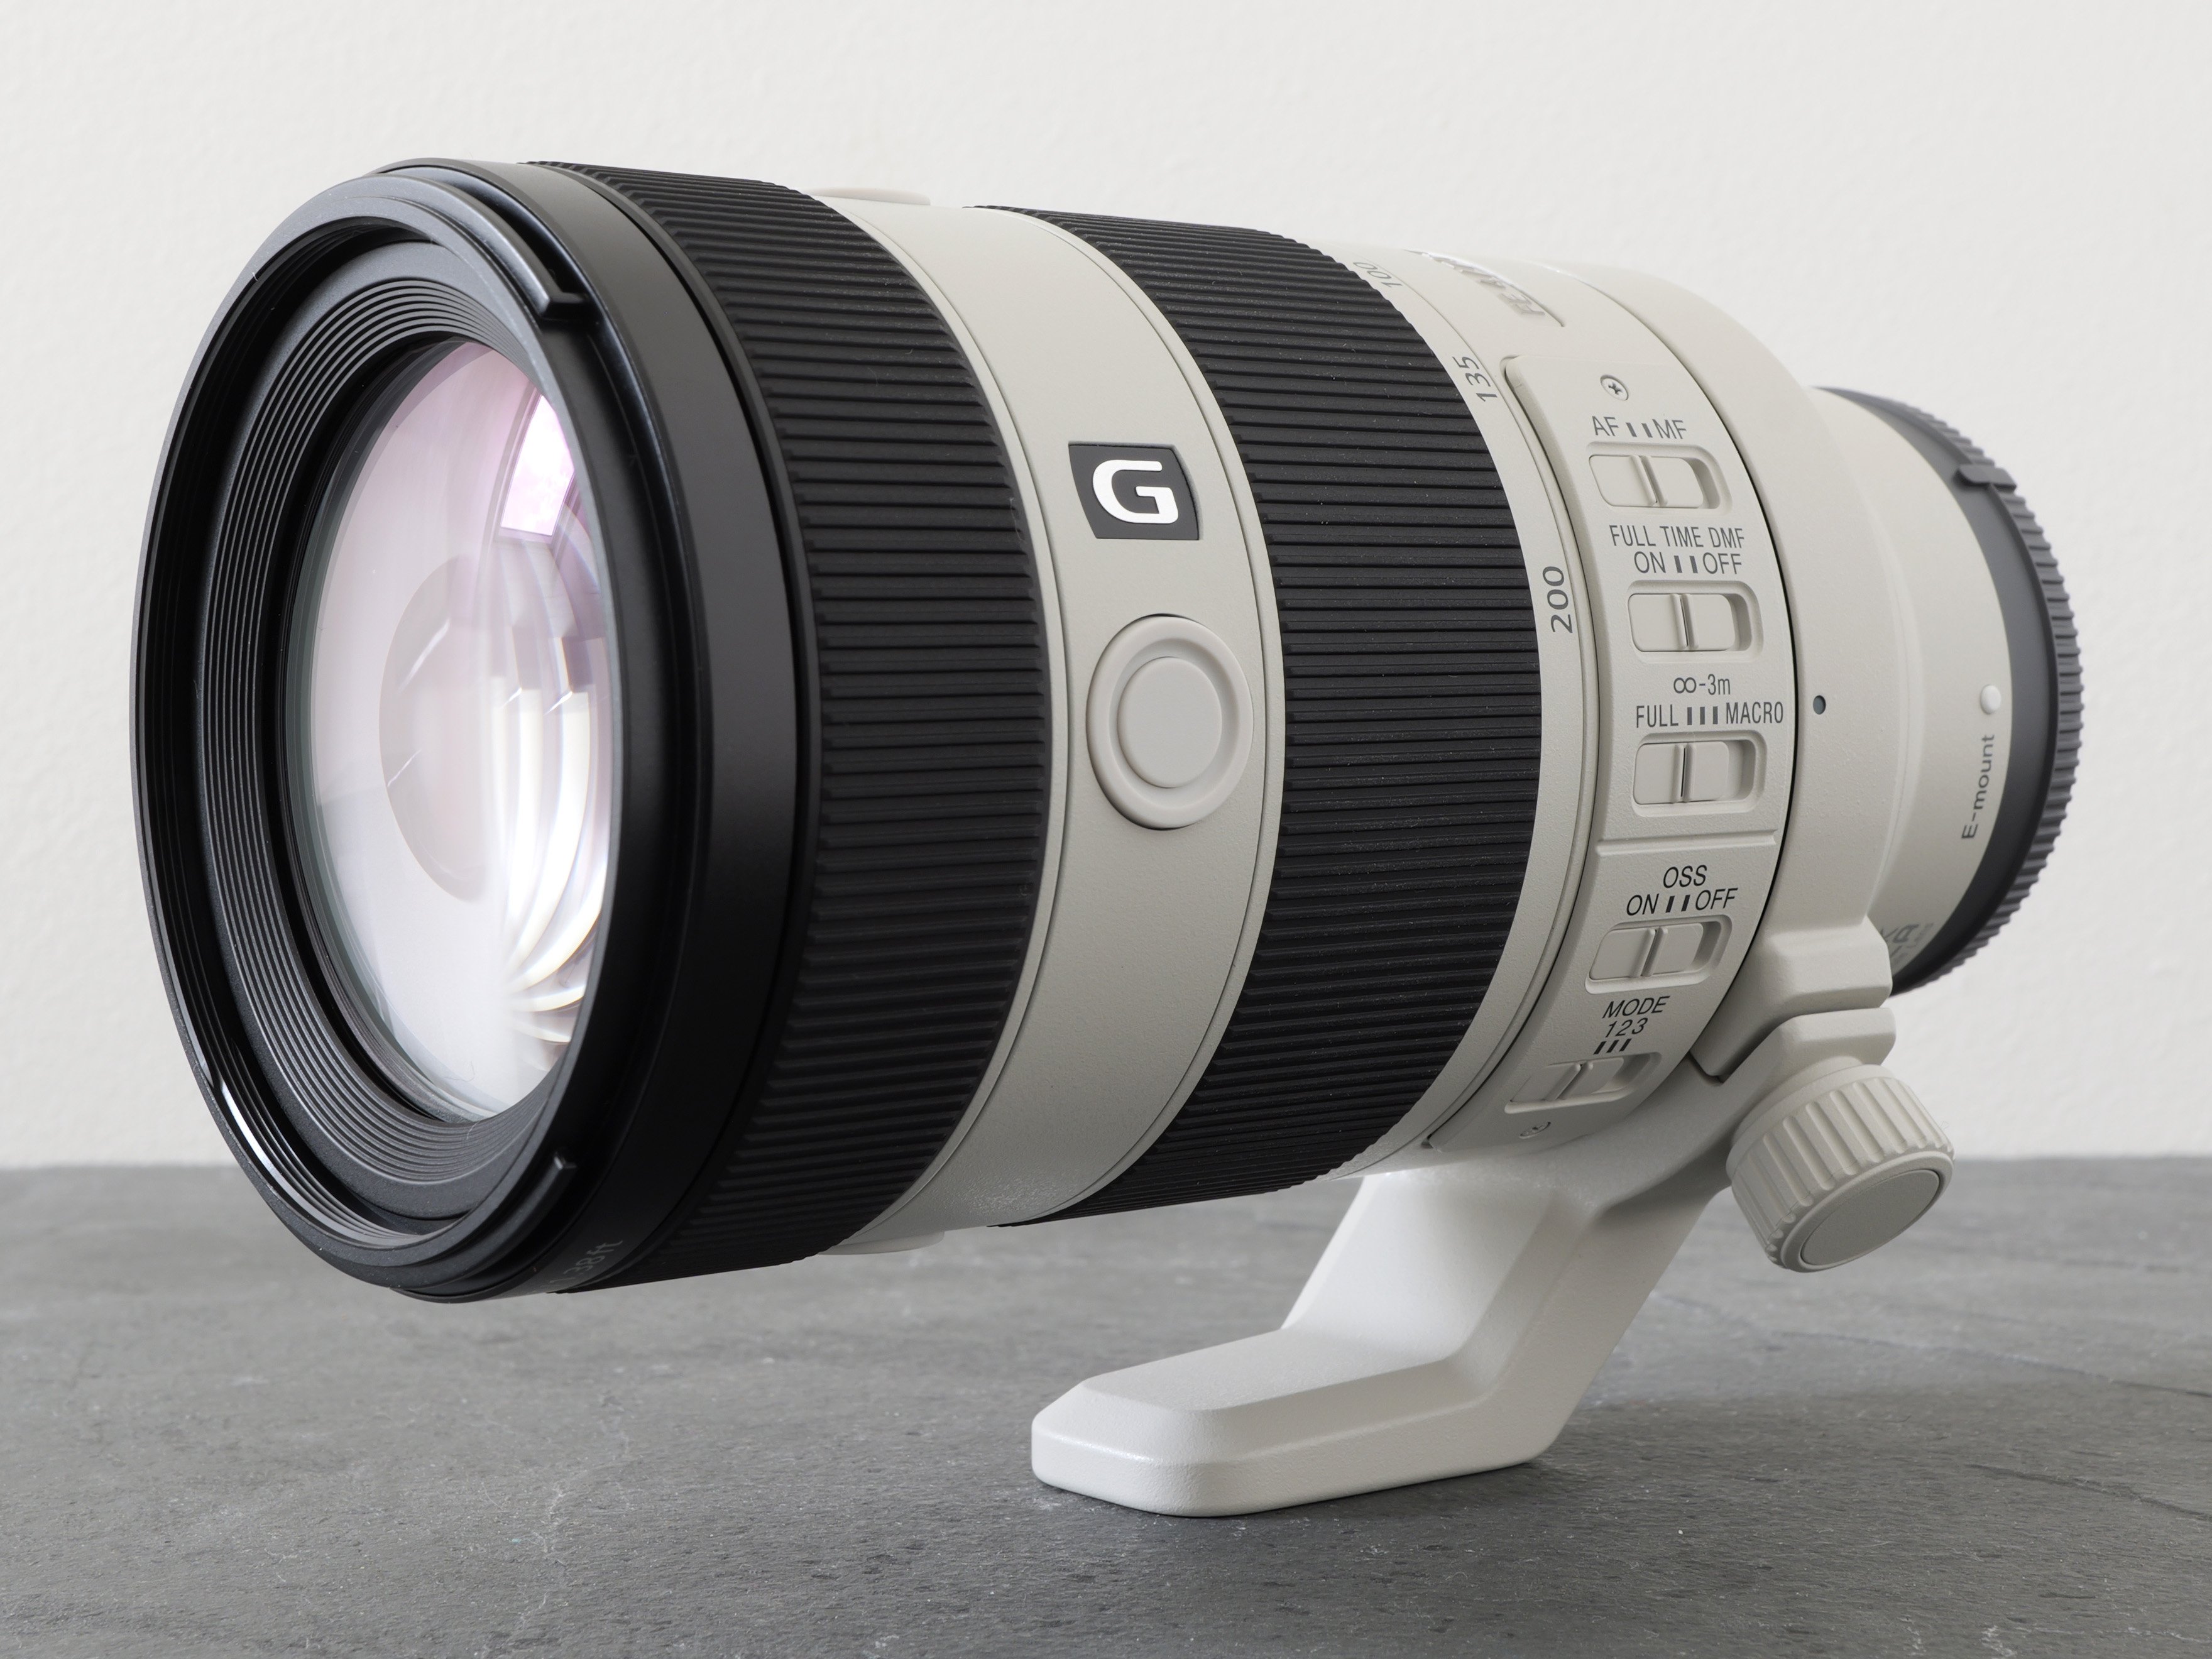 Sony FE 70-200mm f4 G OSS II review | Cameralabs